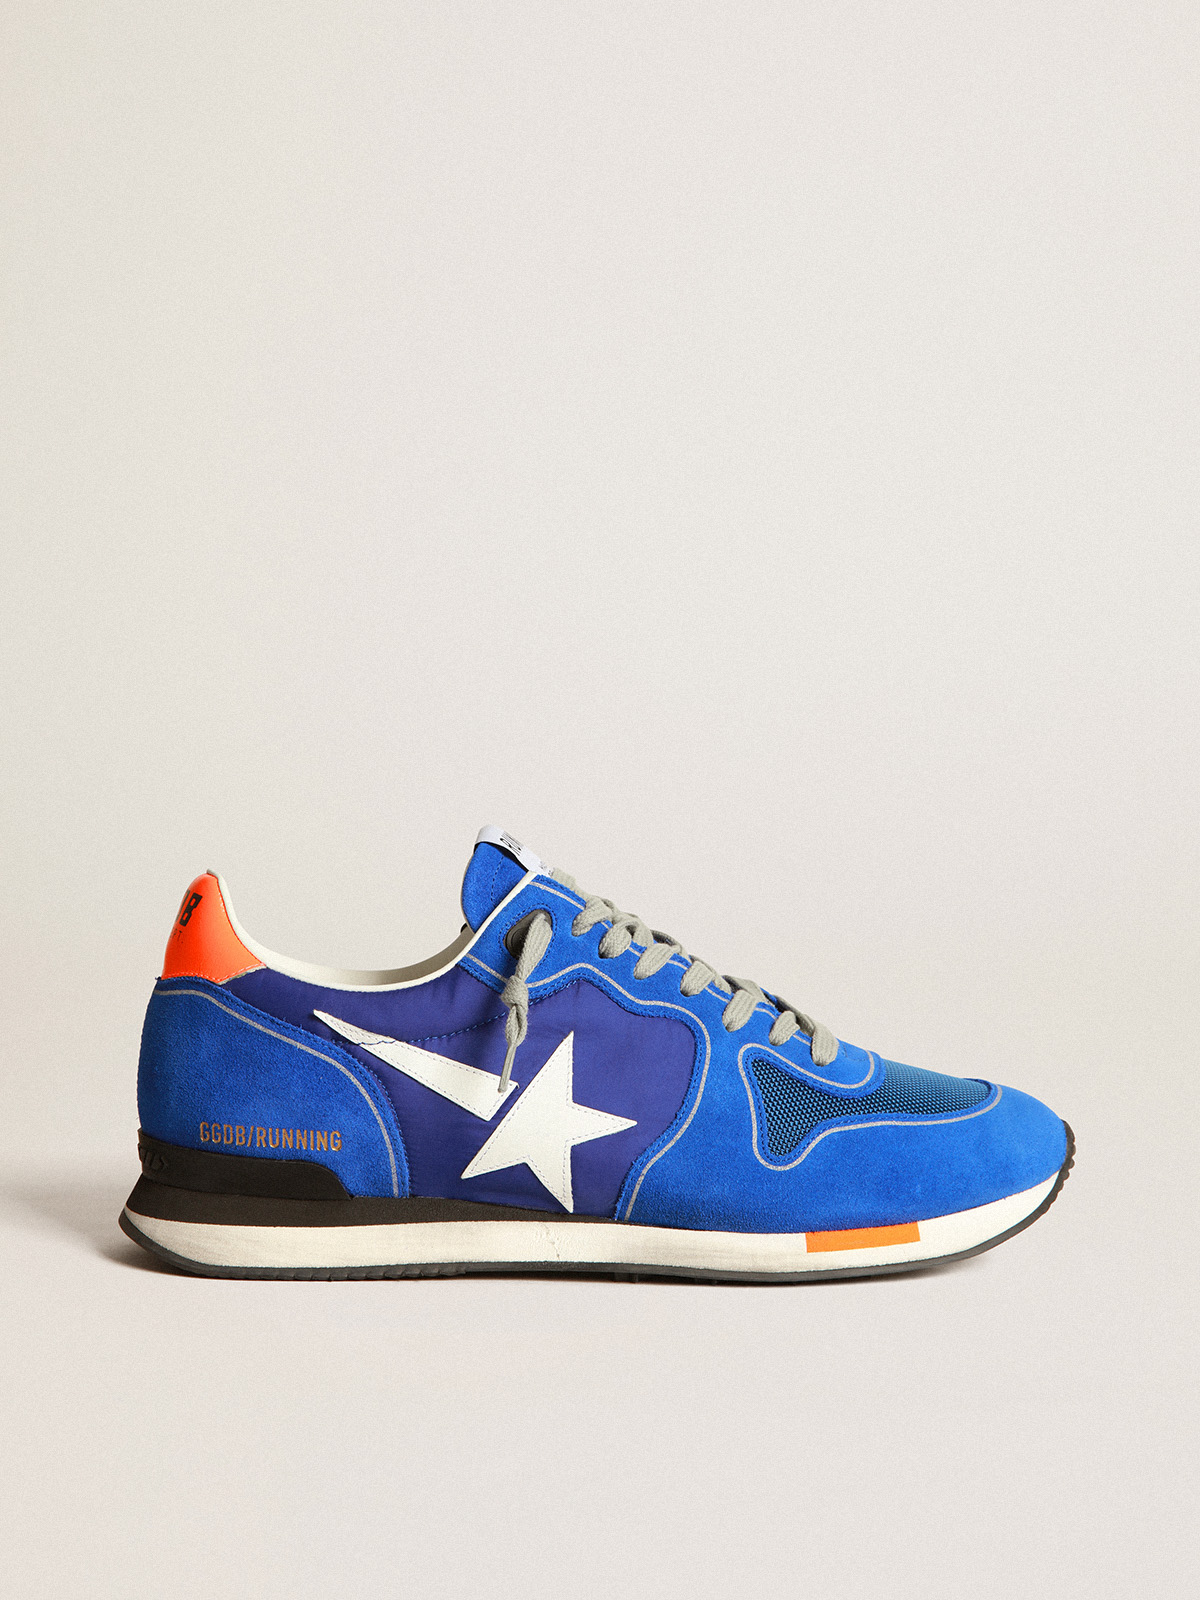 Condensar comerciante cristiano Electric blue Running sneakers with white star | Golden Goose